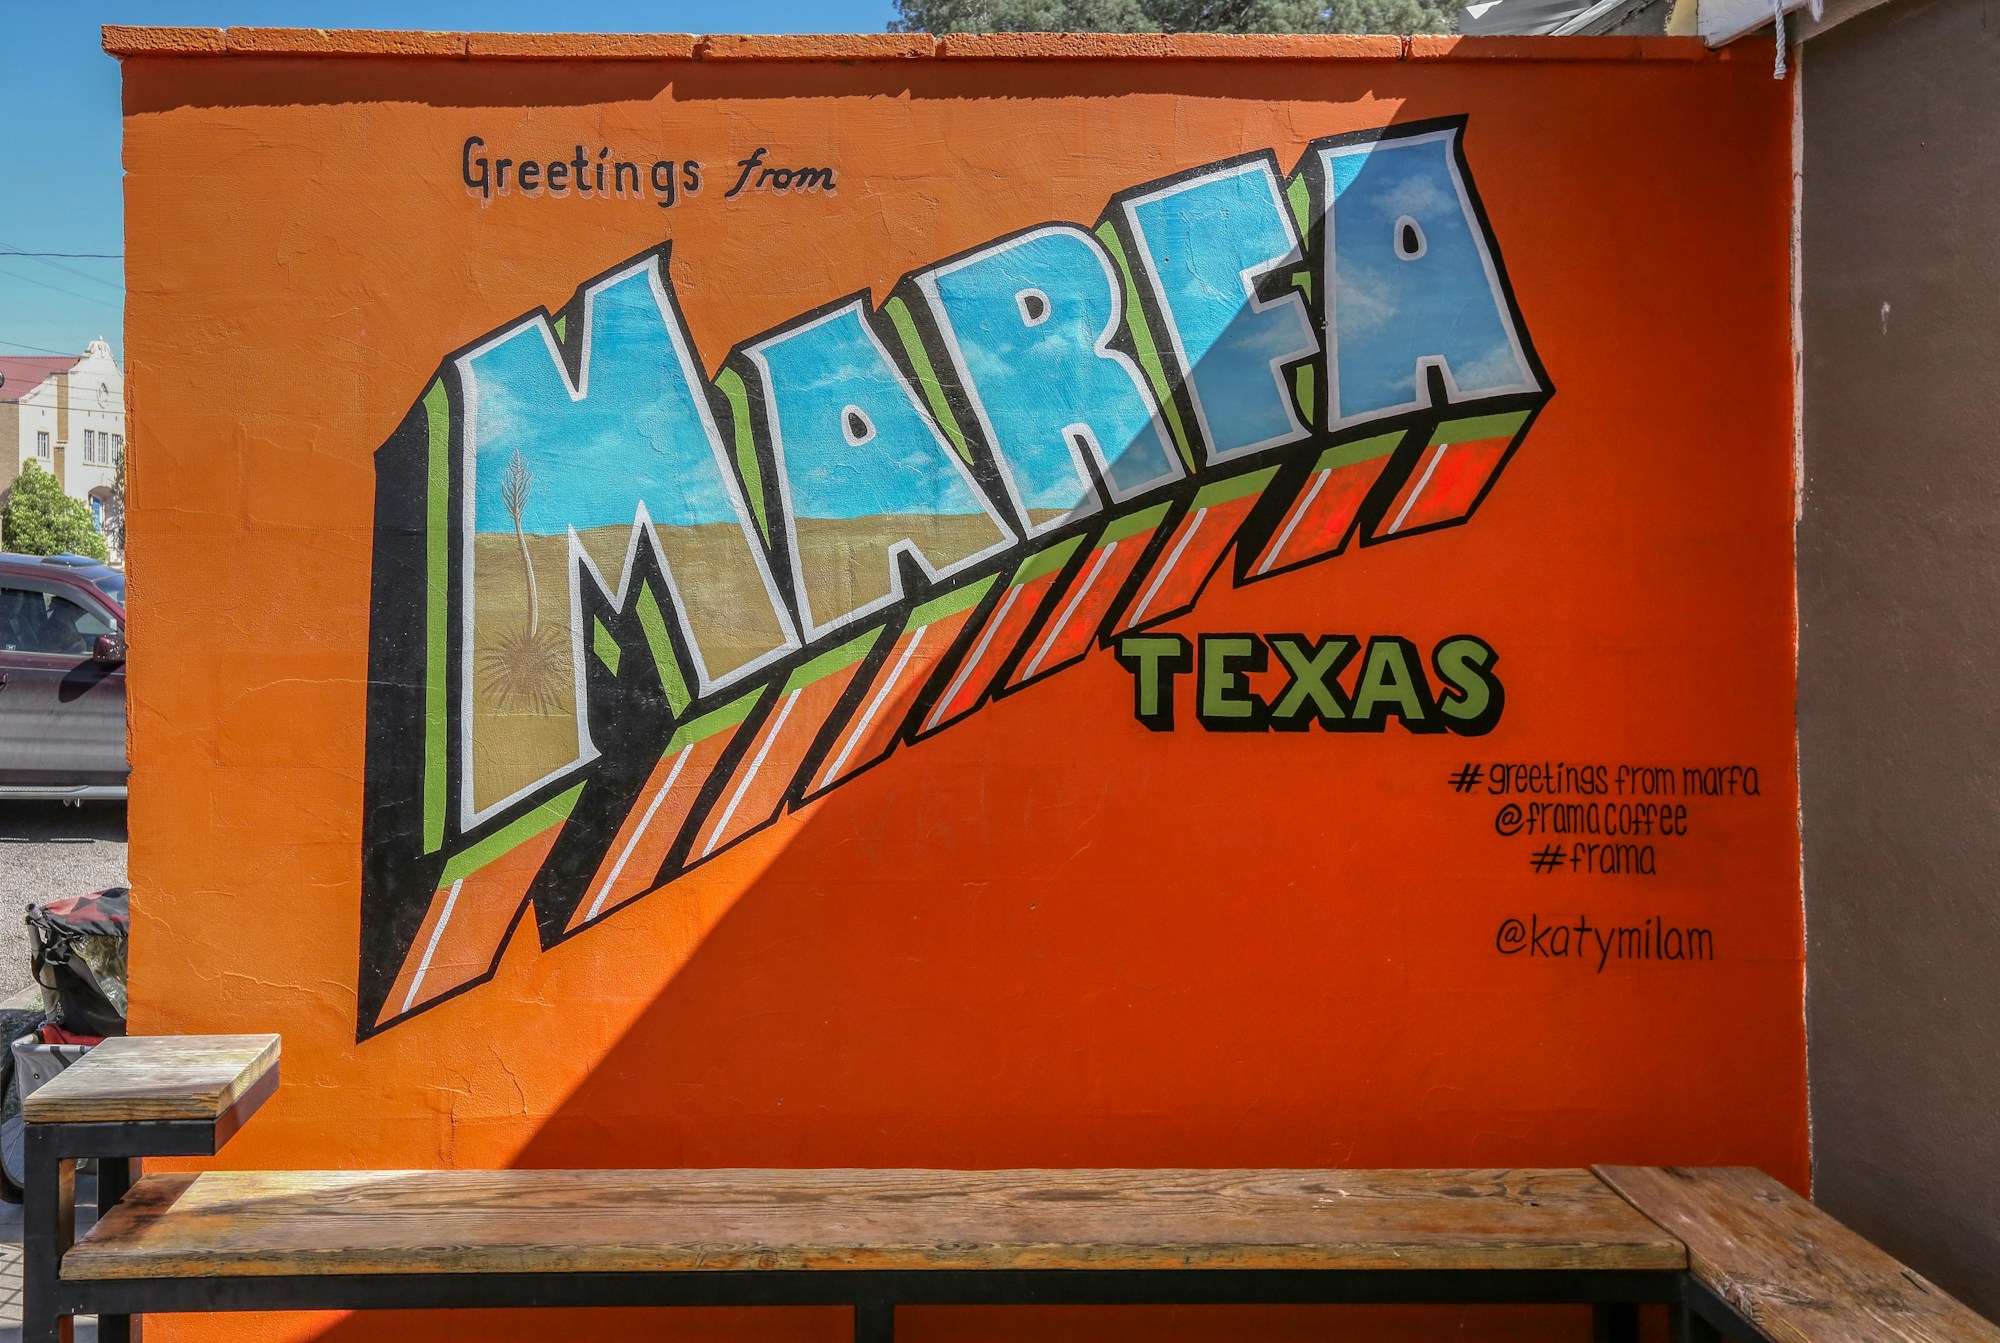 Marfa Culture and Traditions: Local History, Customs, Festivals